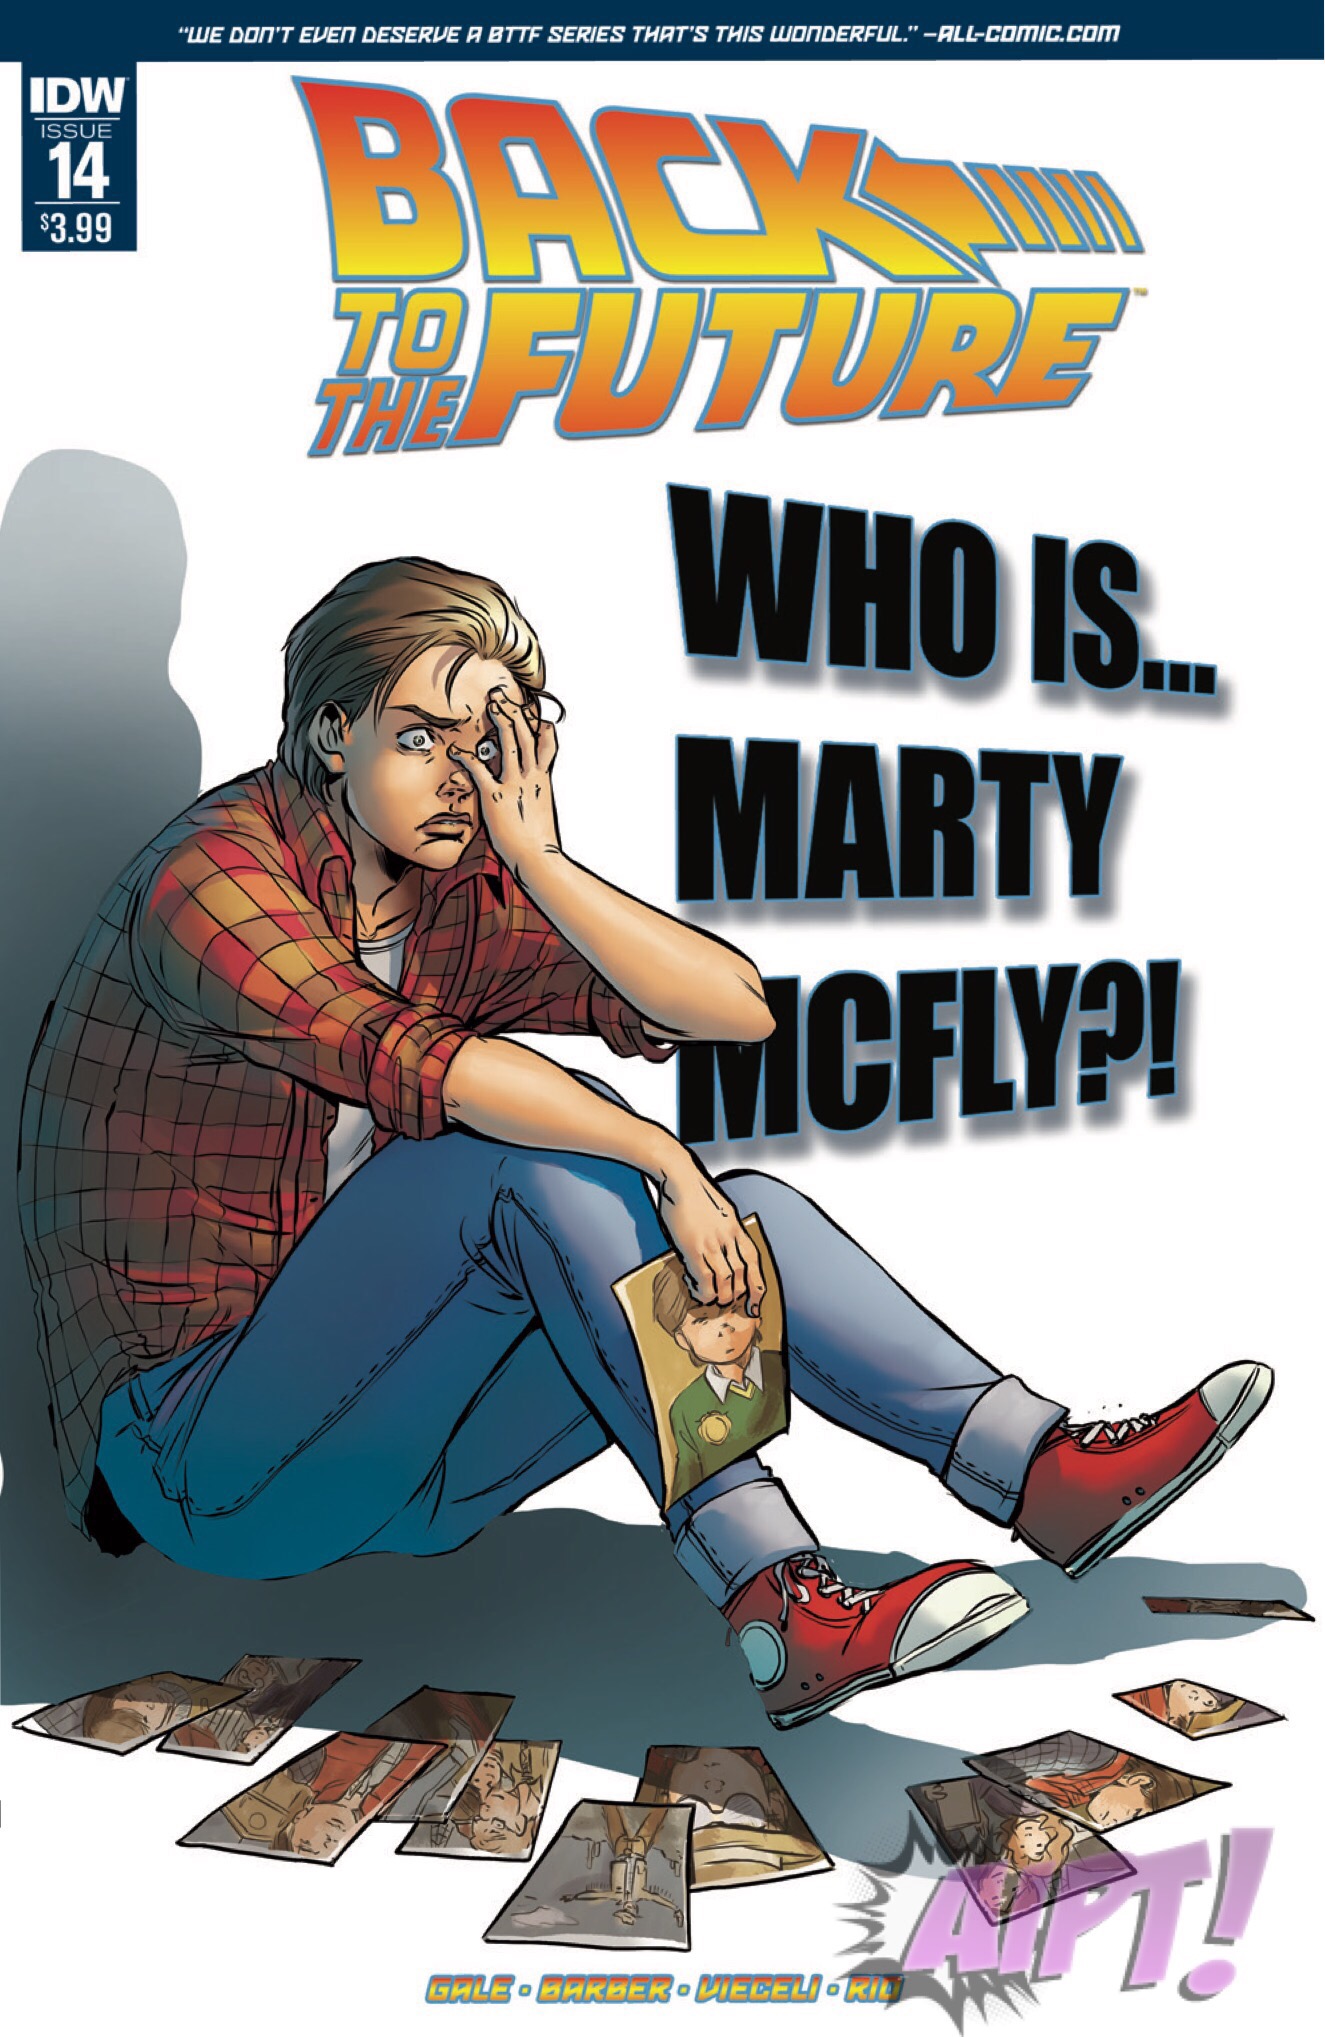 [EXCLUSIVE] IDW Preview: Back to the Future #14